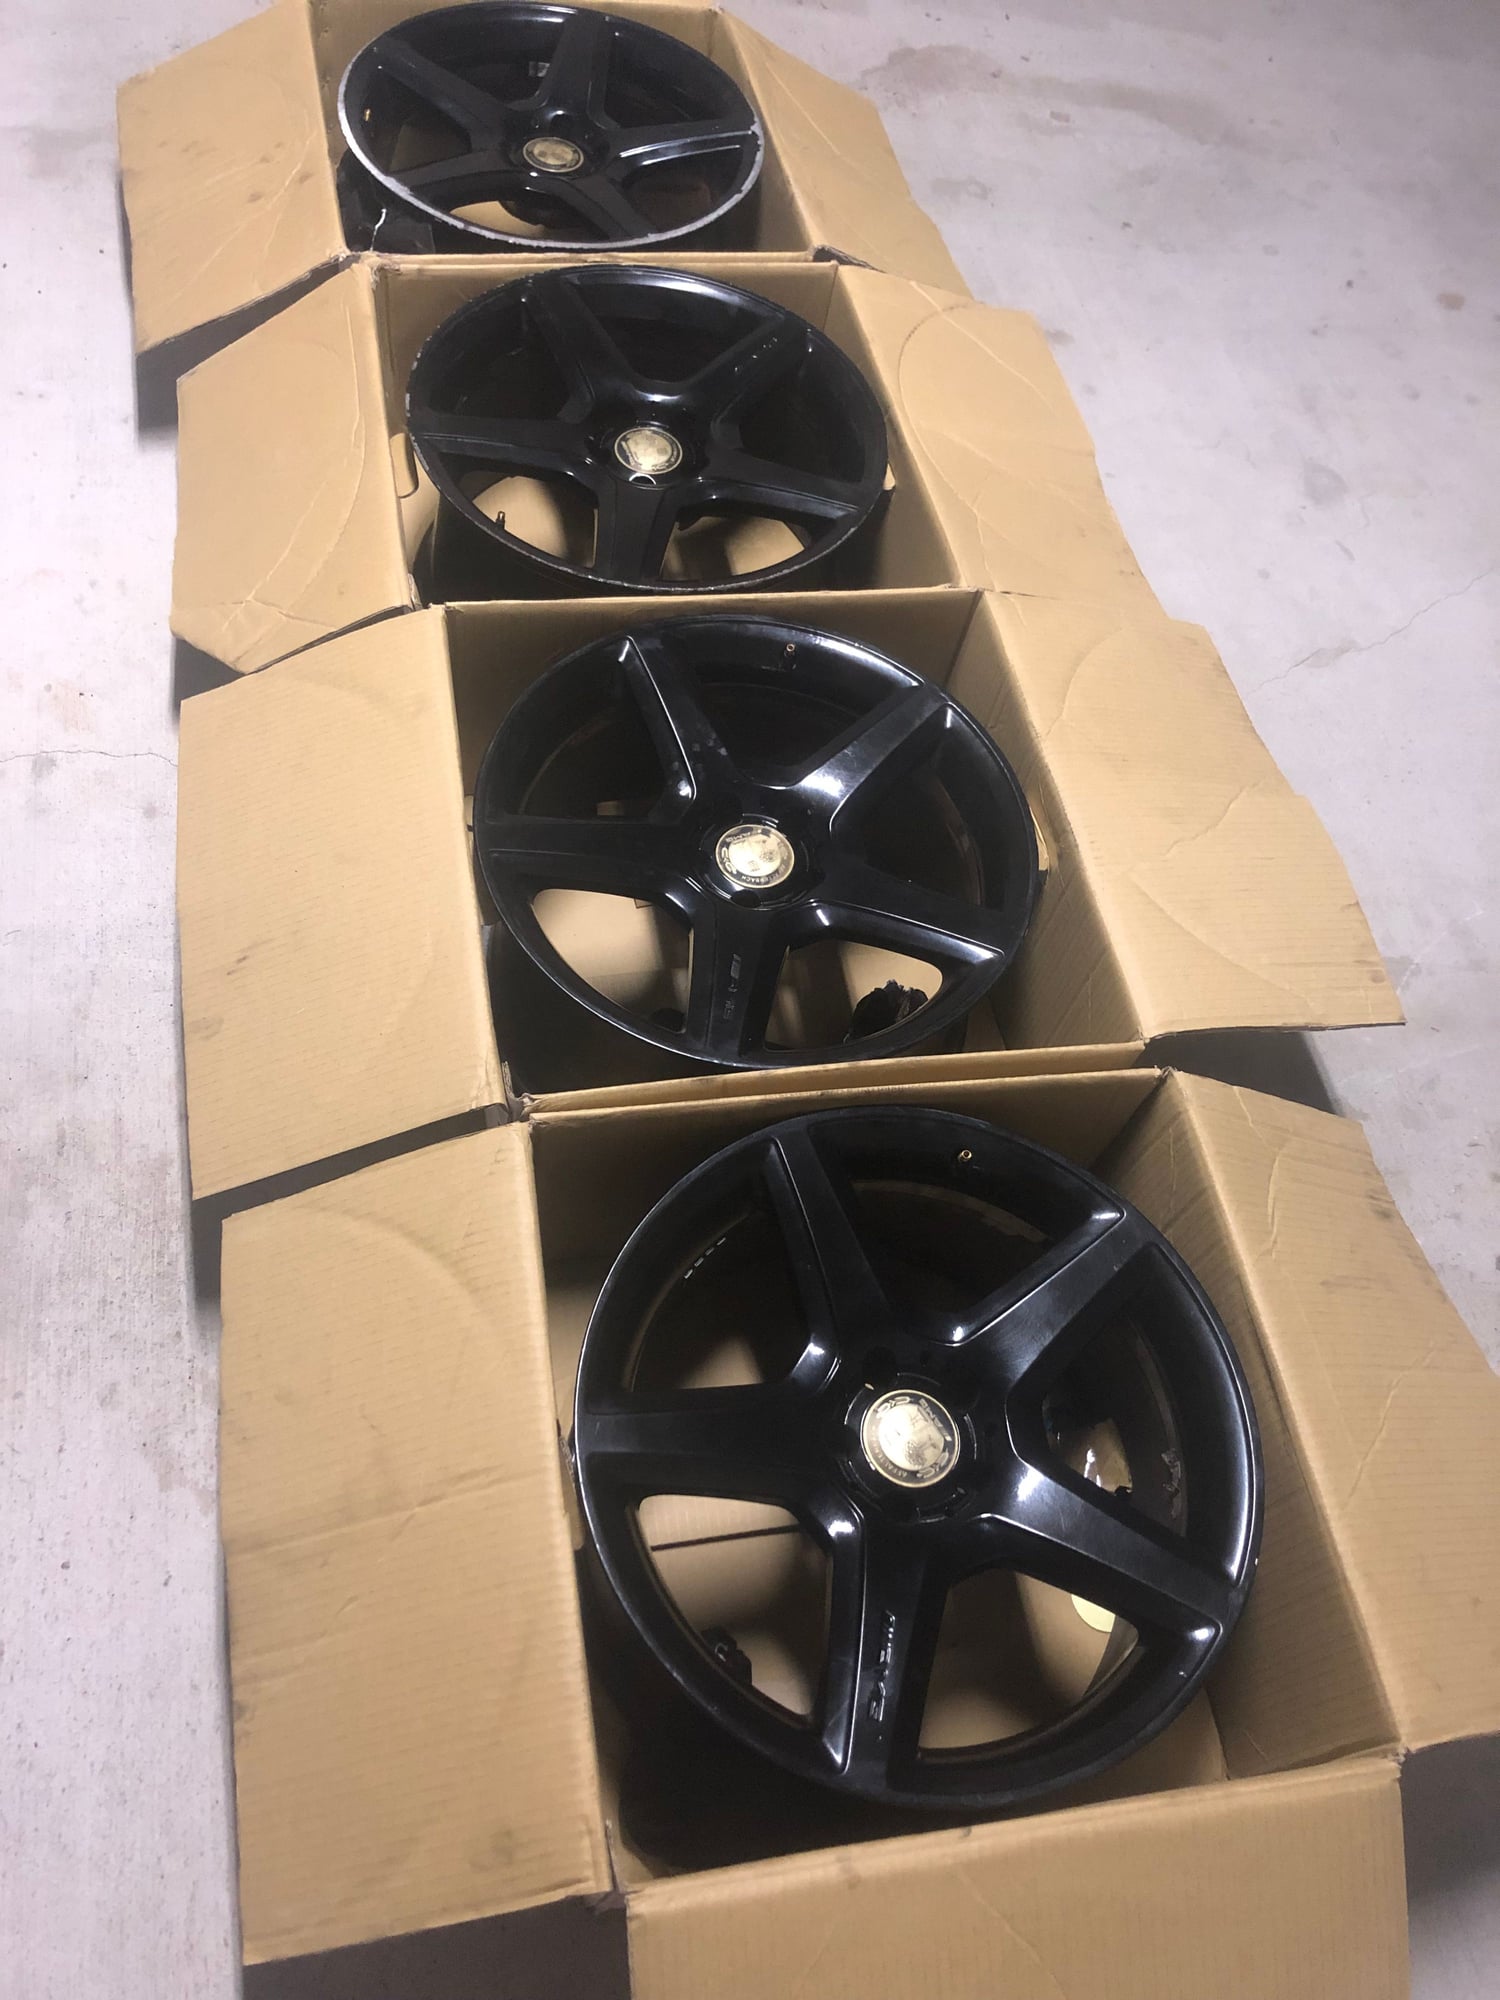 Wheels and Tires/Axles - Selling a set of Black CLS55 AMG 5 Spoke Concave Wheels!!! Make me an offer! - Used - 2006 to 2008 Mercedes-Benz CLS55 AMG - Dfw, TX 76051, United States